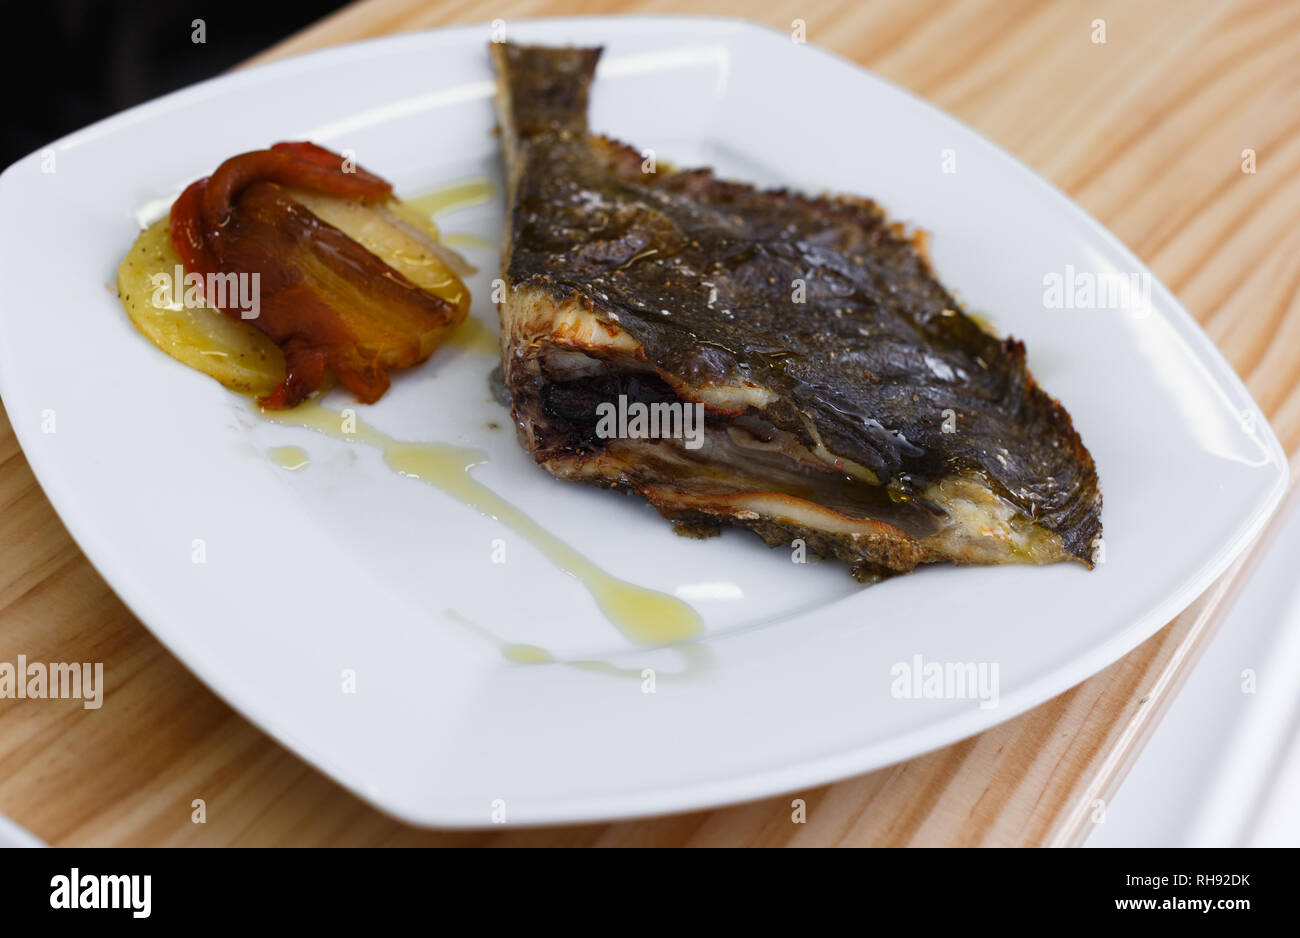 Closeup of gourmet restaurant dish of fried flounder with caramelized vegetables Stock Photo